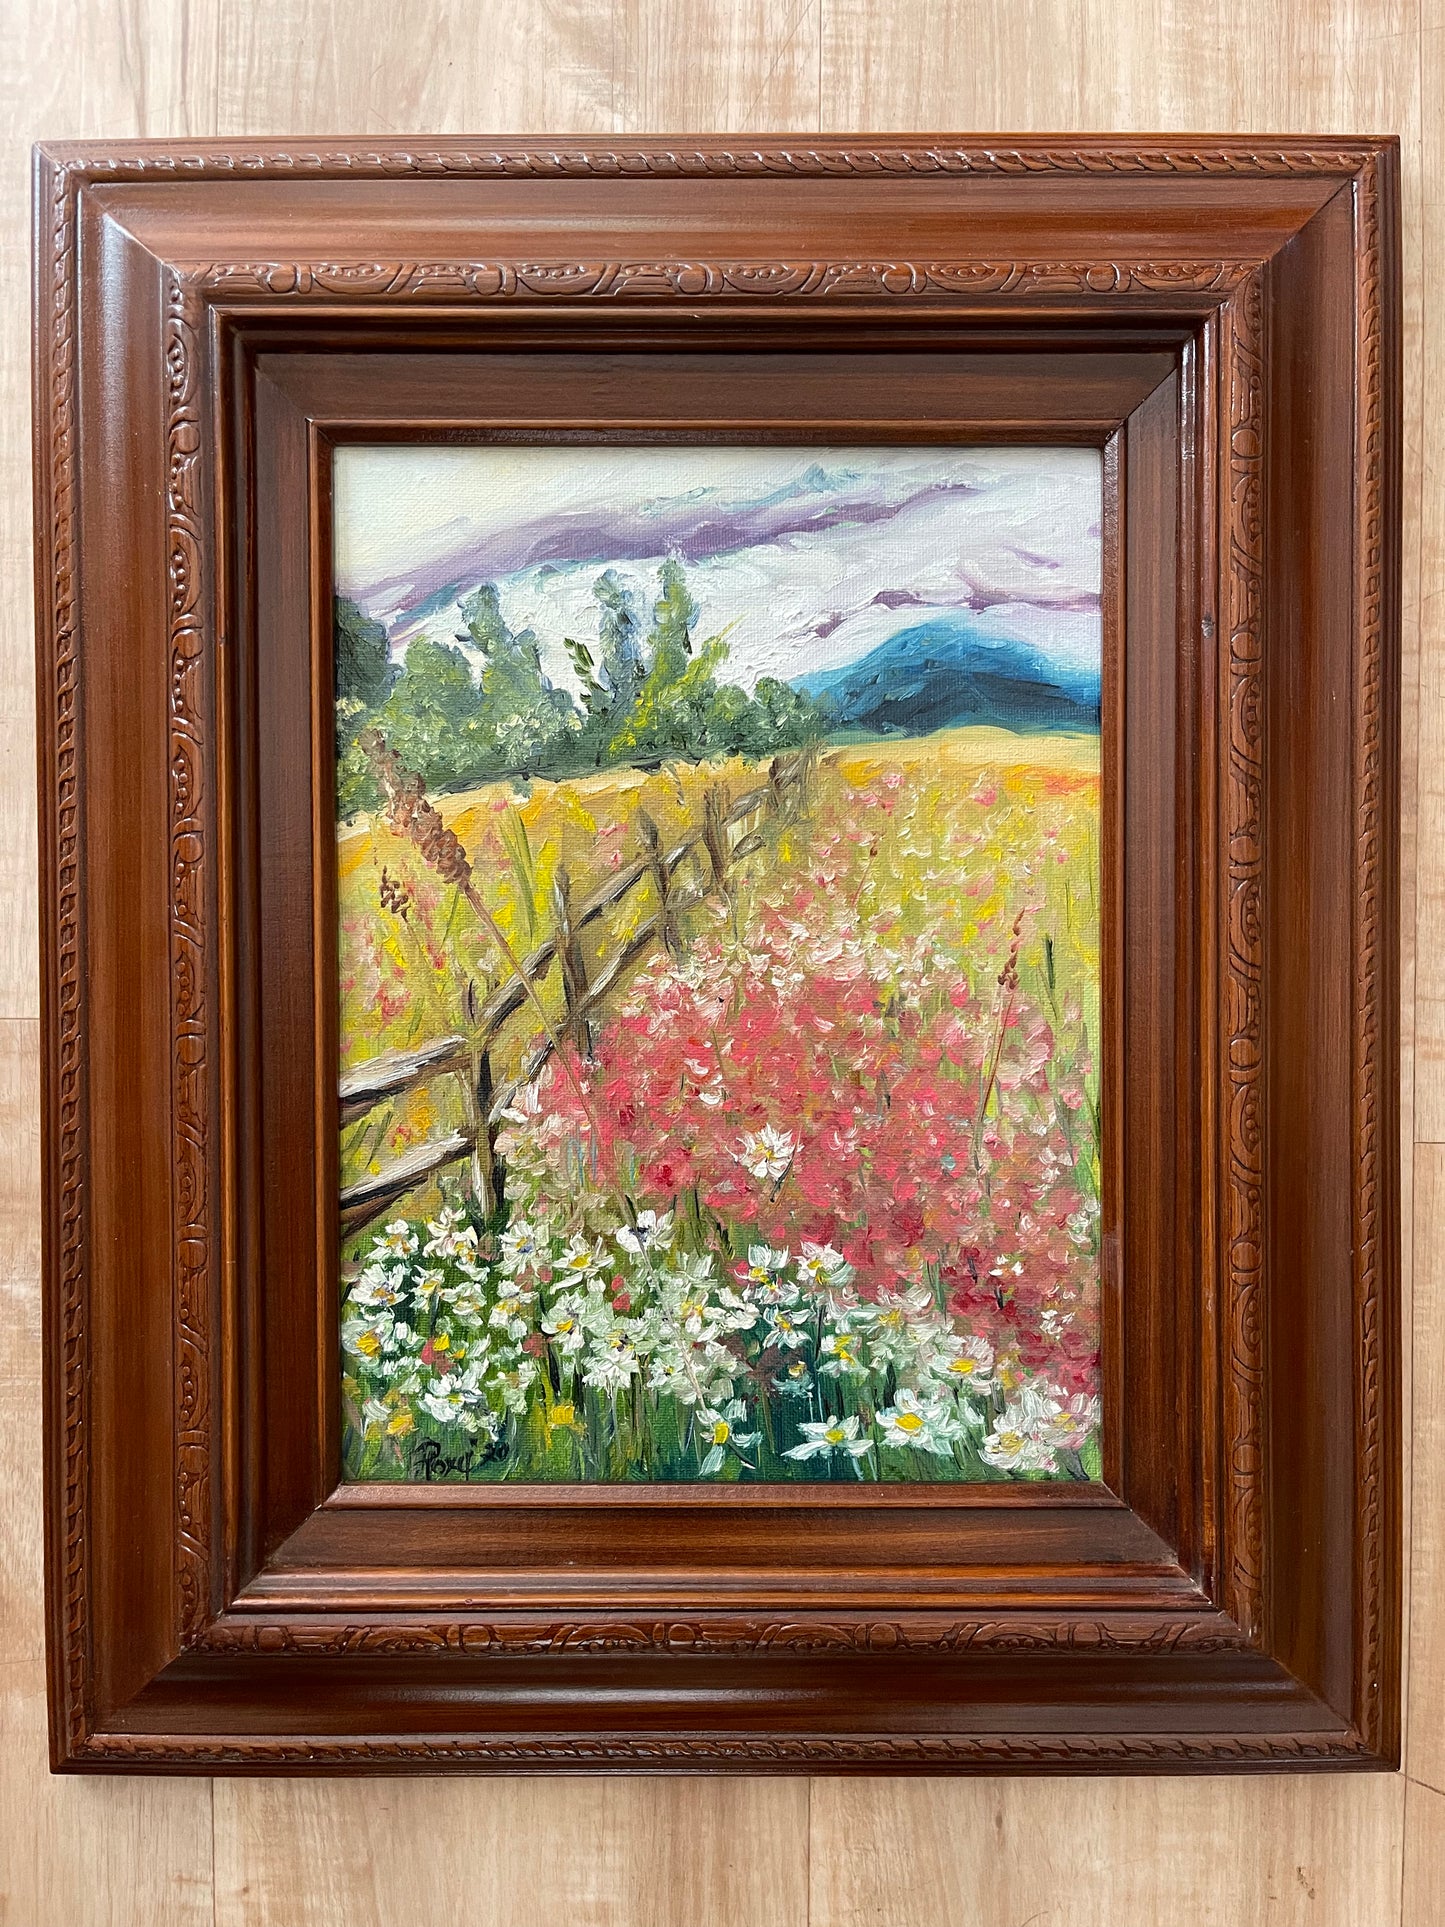 French Countryside-Original Oil Landscape Painting Framed